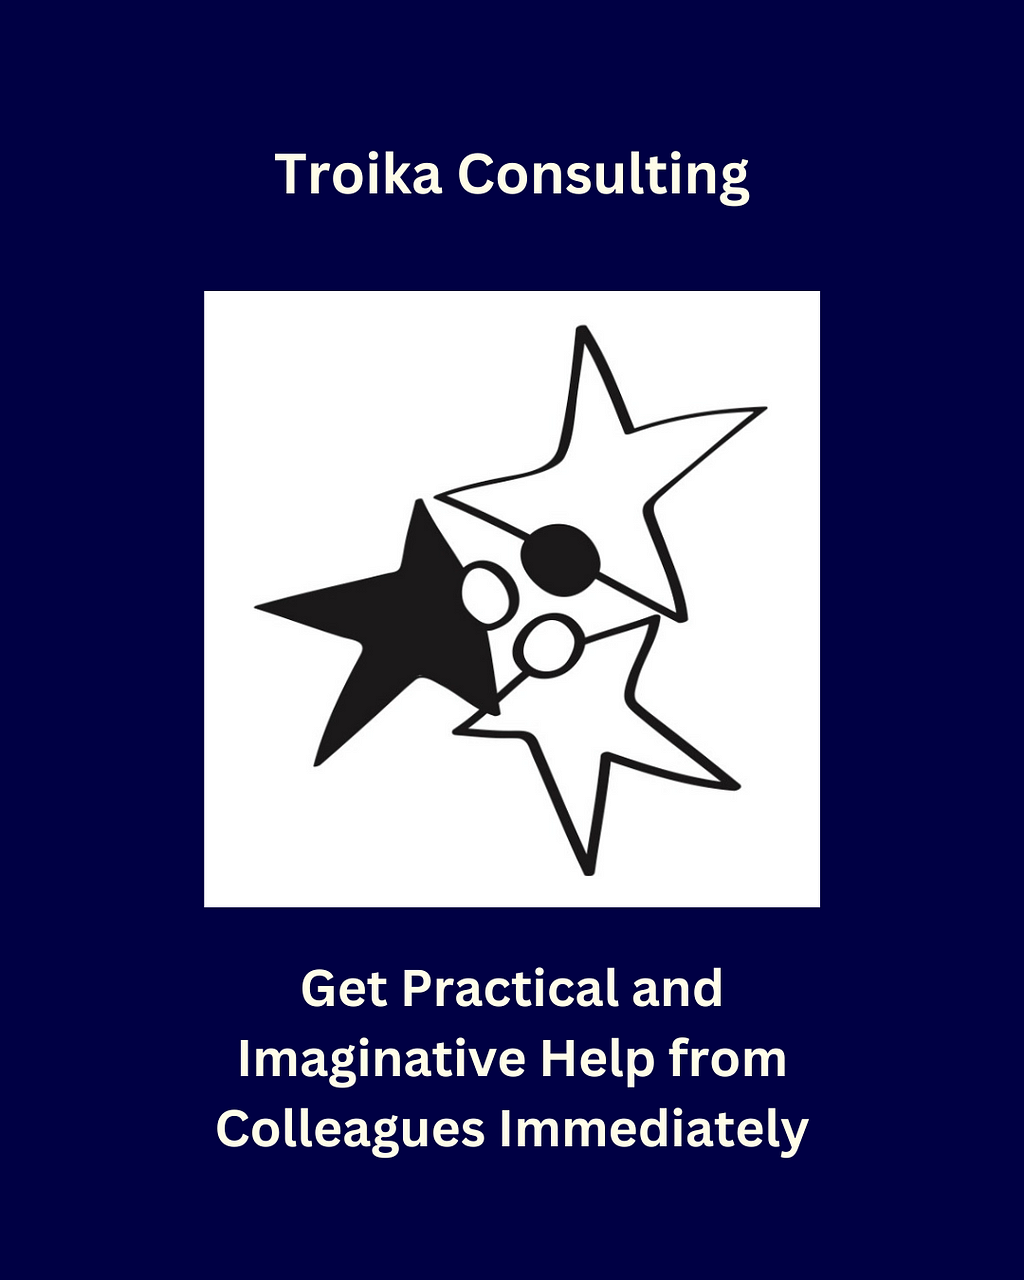 Troika Consulting — Get Practical and Imaginative Help from Colleagues Immediately